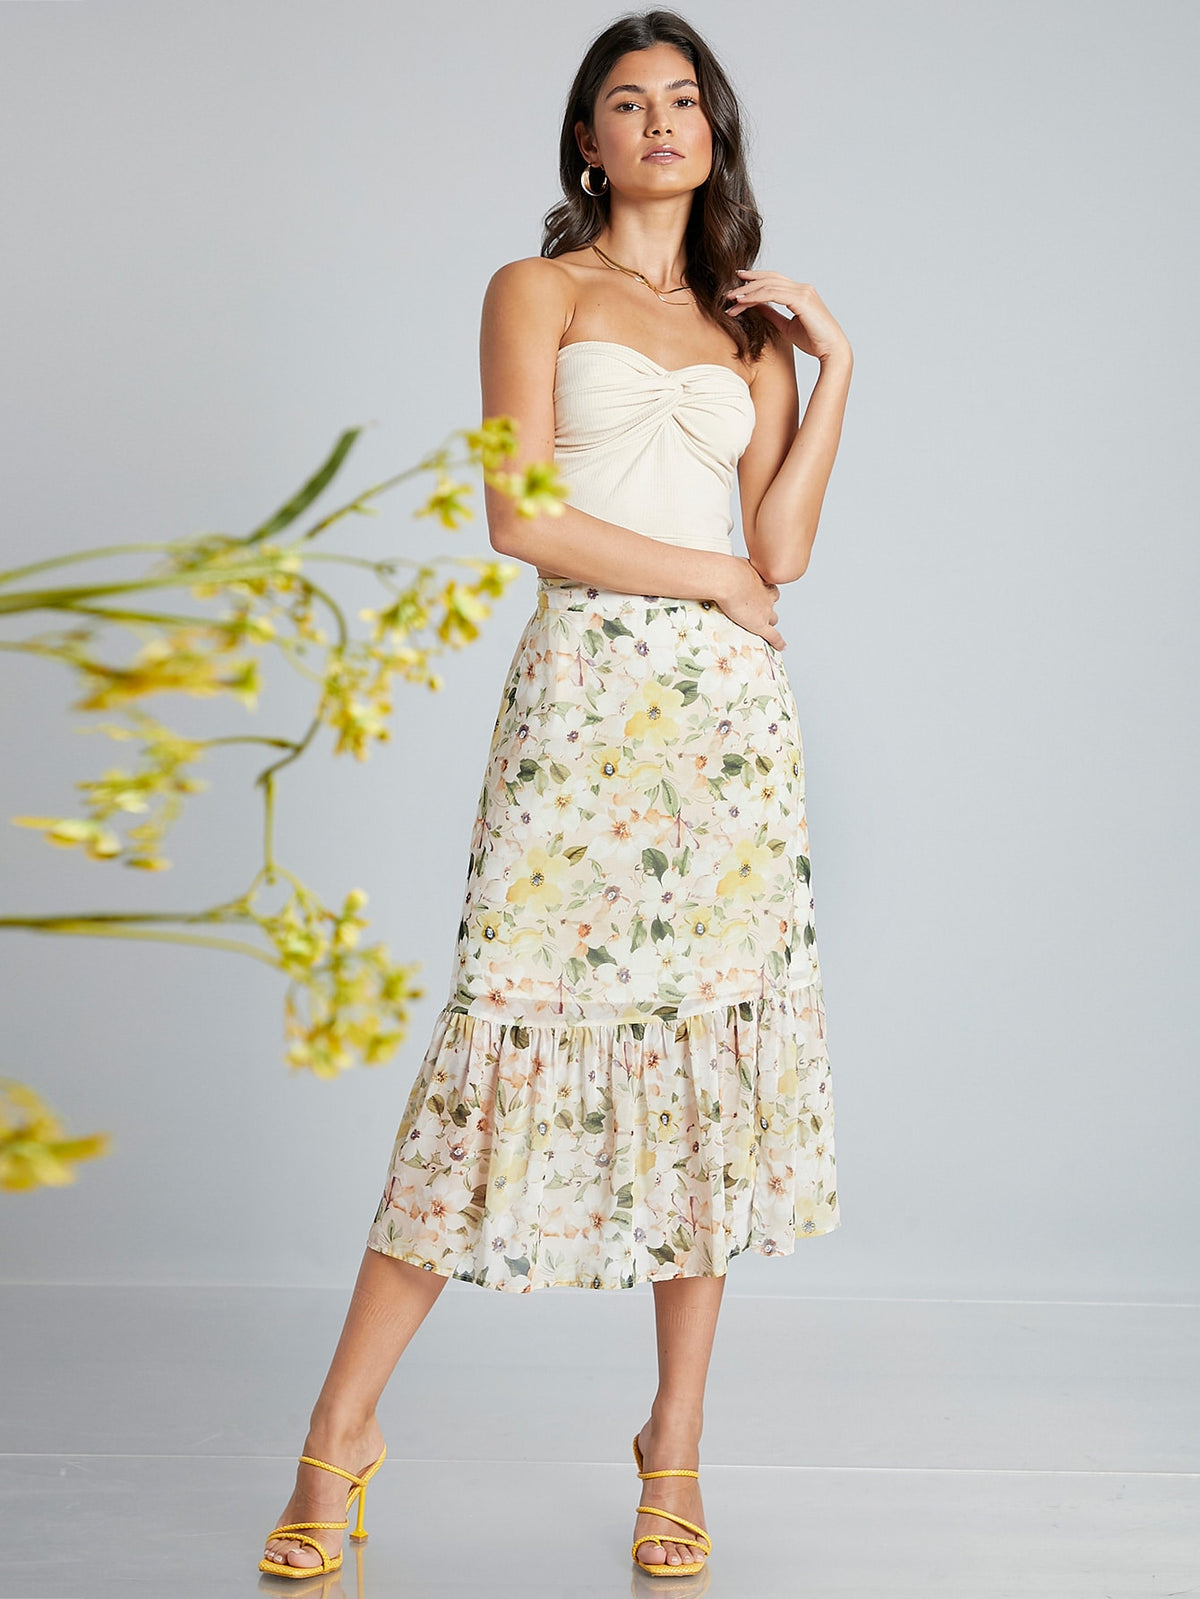 Floral Skirt With Ruffle Hem - 